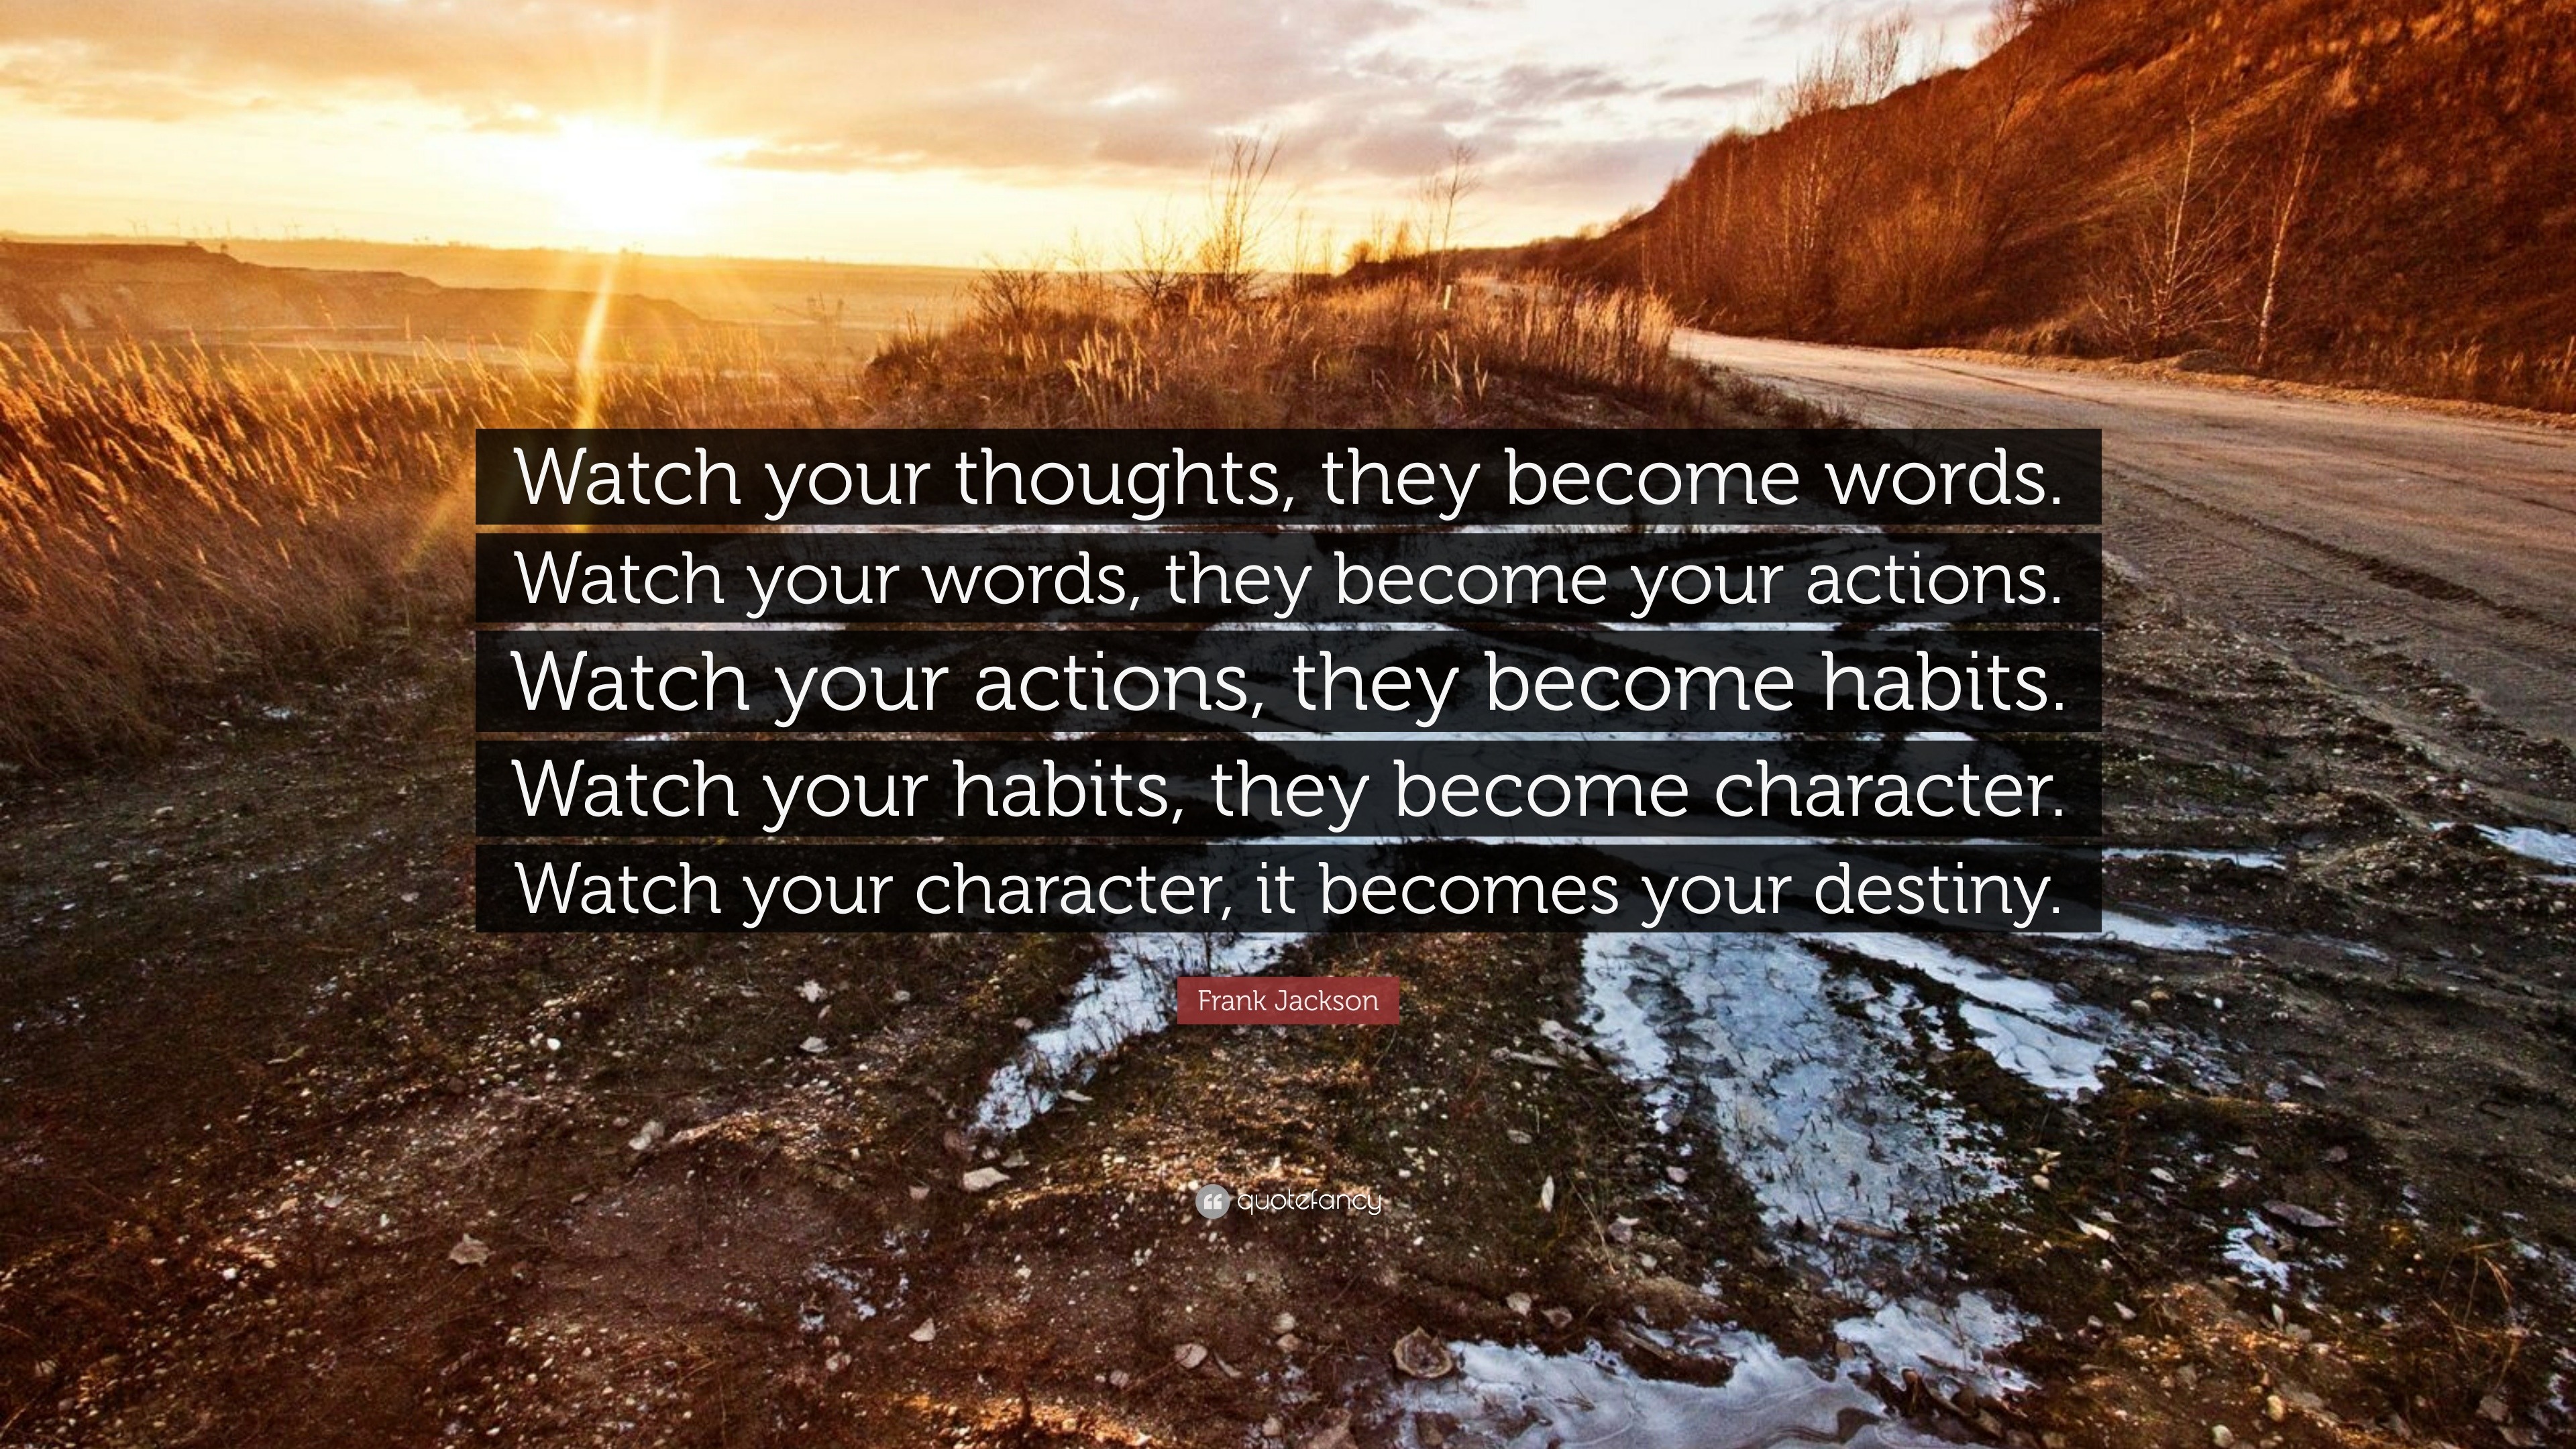 watch your thoughts they become words wallpaper